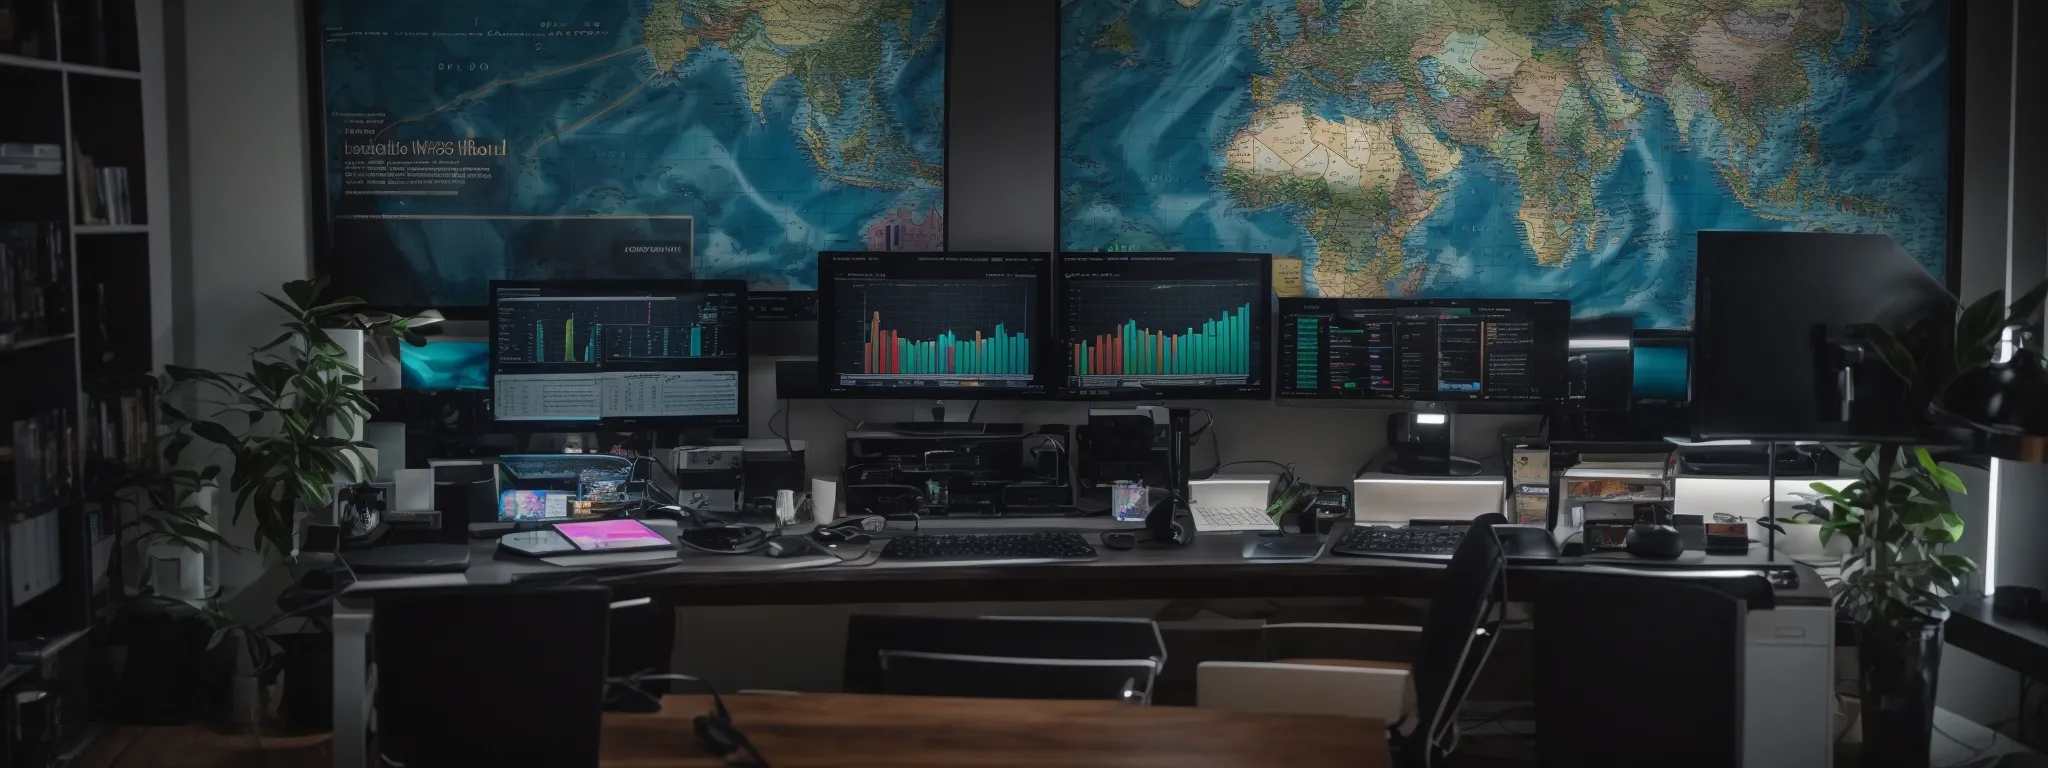 a wide desk with multiple monitors displaying colorful analytics graphs and a large world map highlighting different regions.